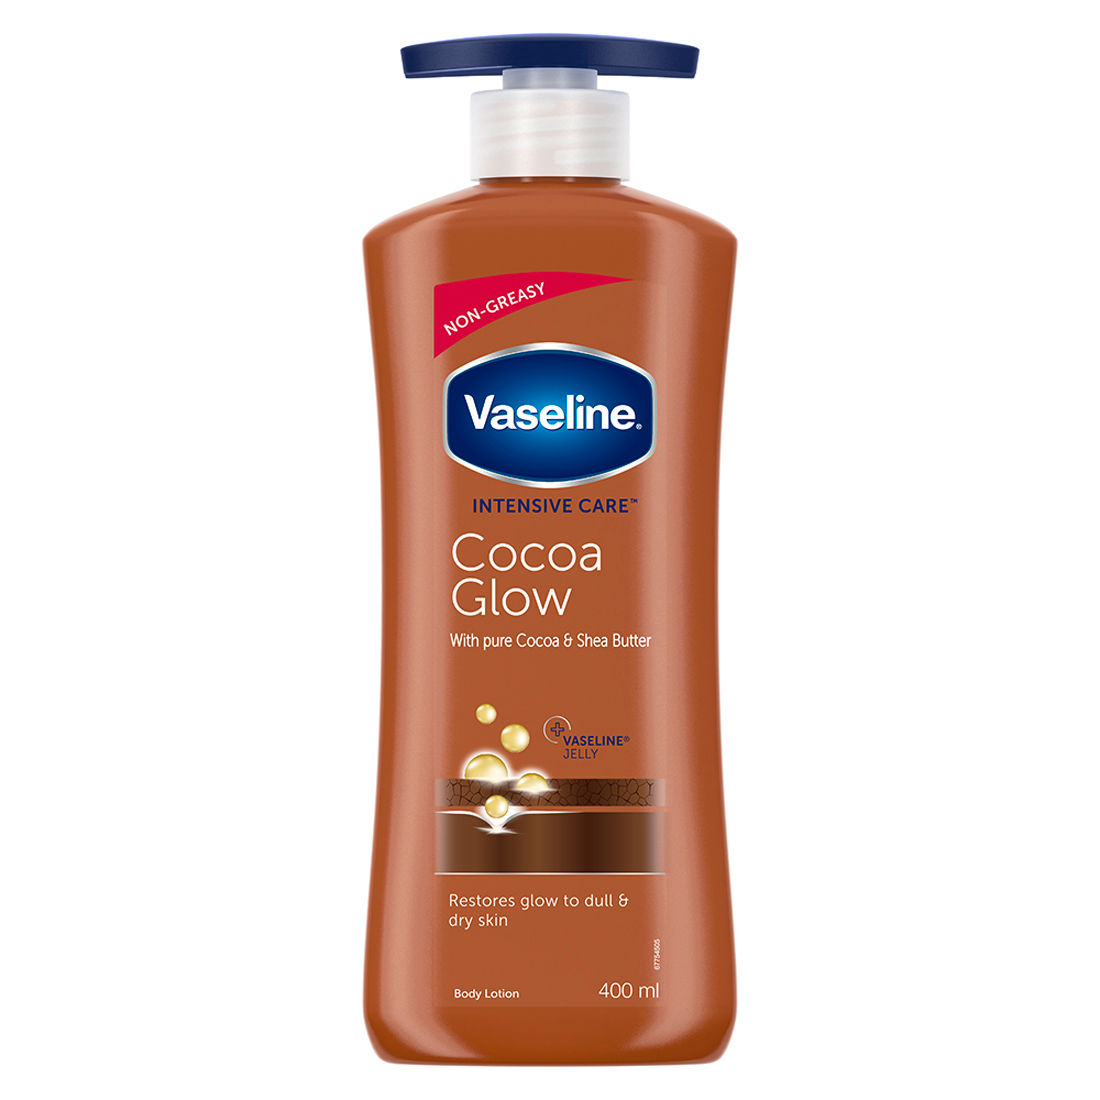 Buy Vaseline Intensive Care Cocoa Glow Body Lotion, 400 ml Online